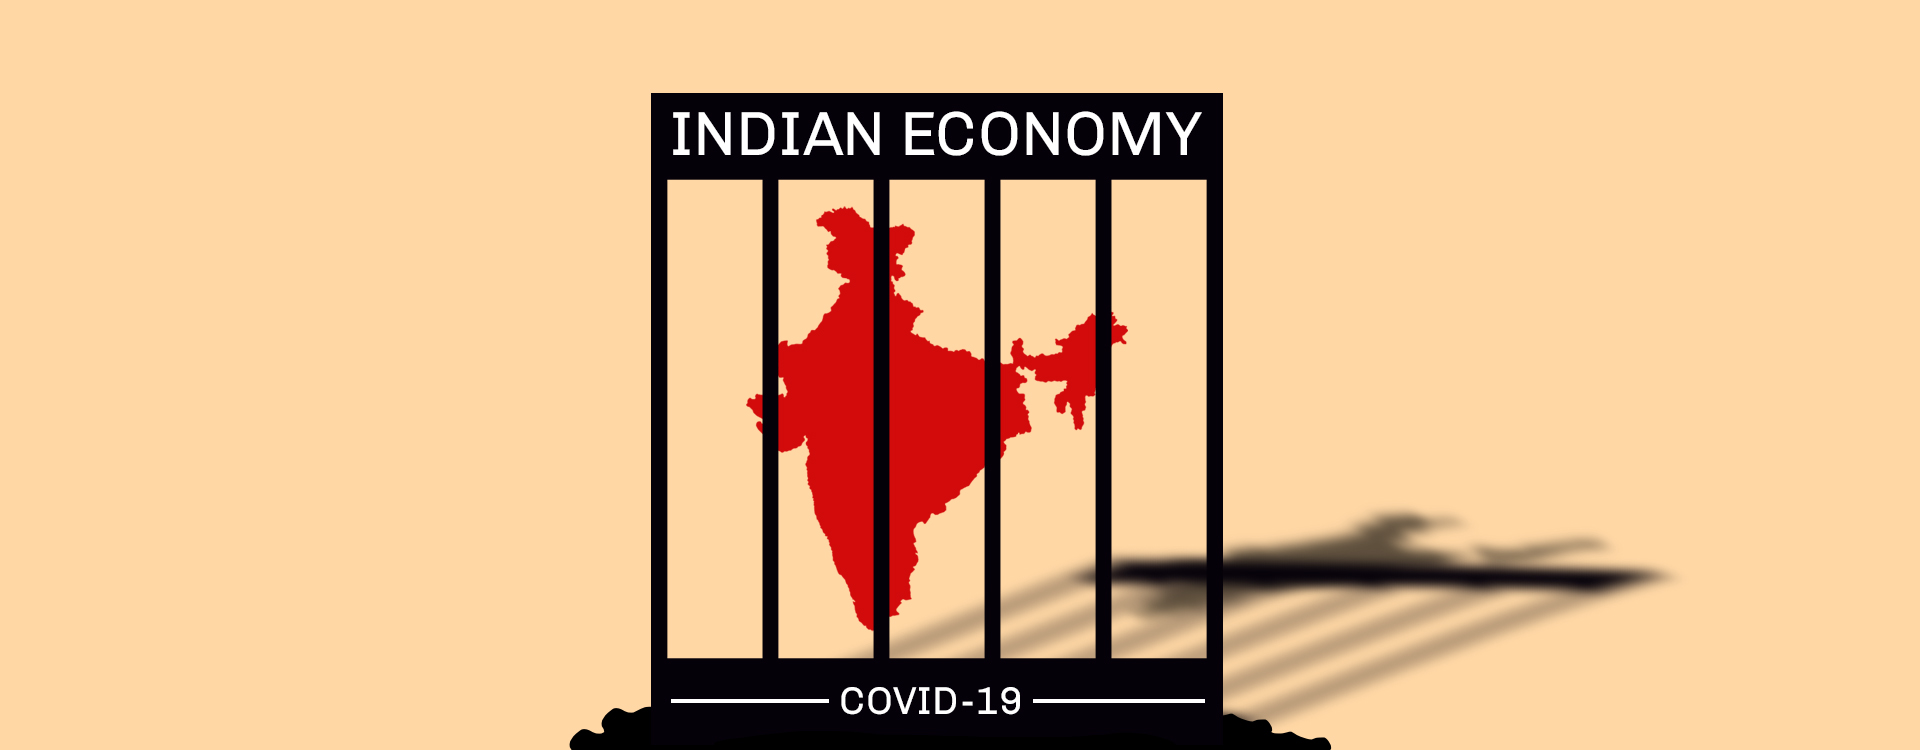 Indian Economy behind lockdown bars after COVID-19